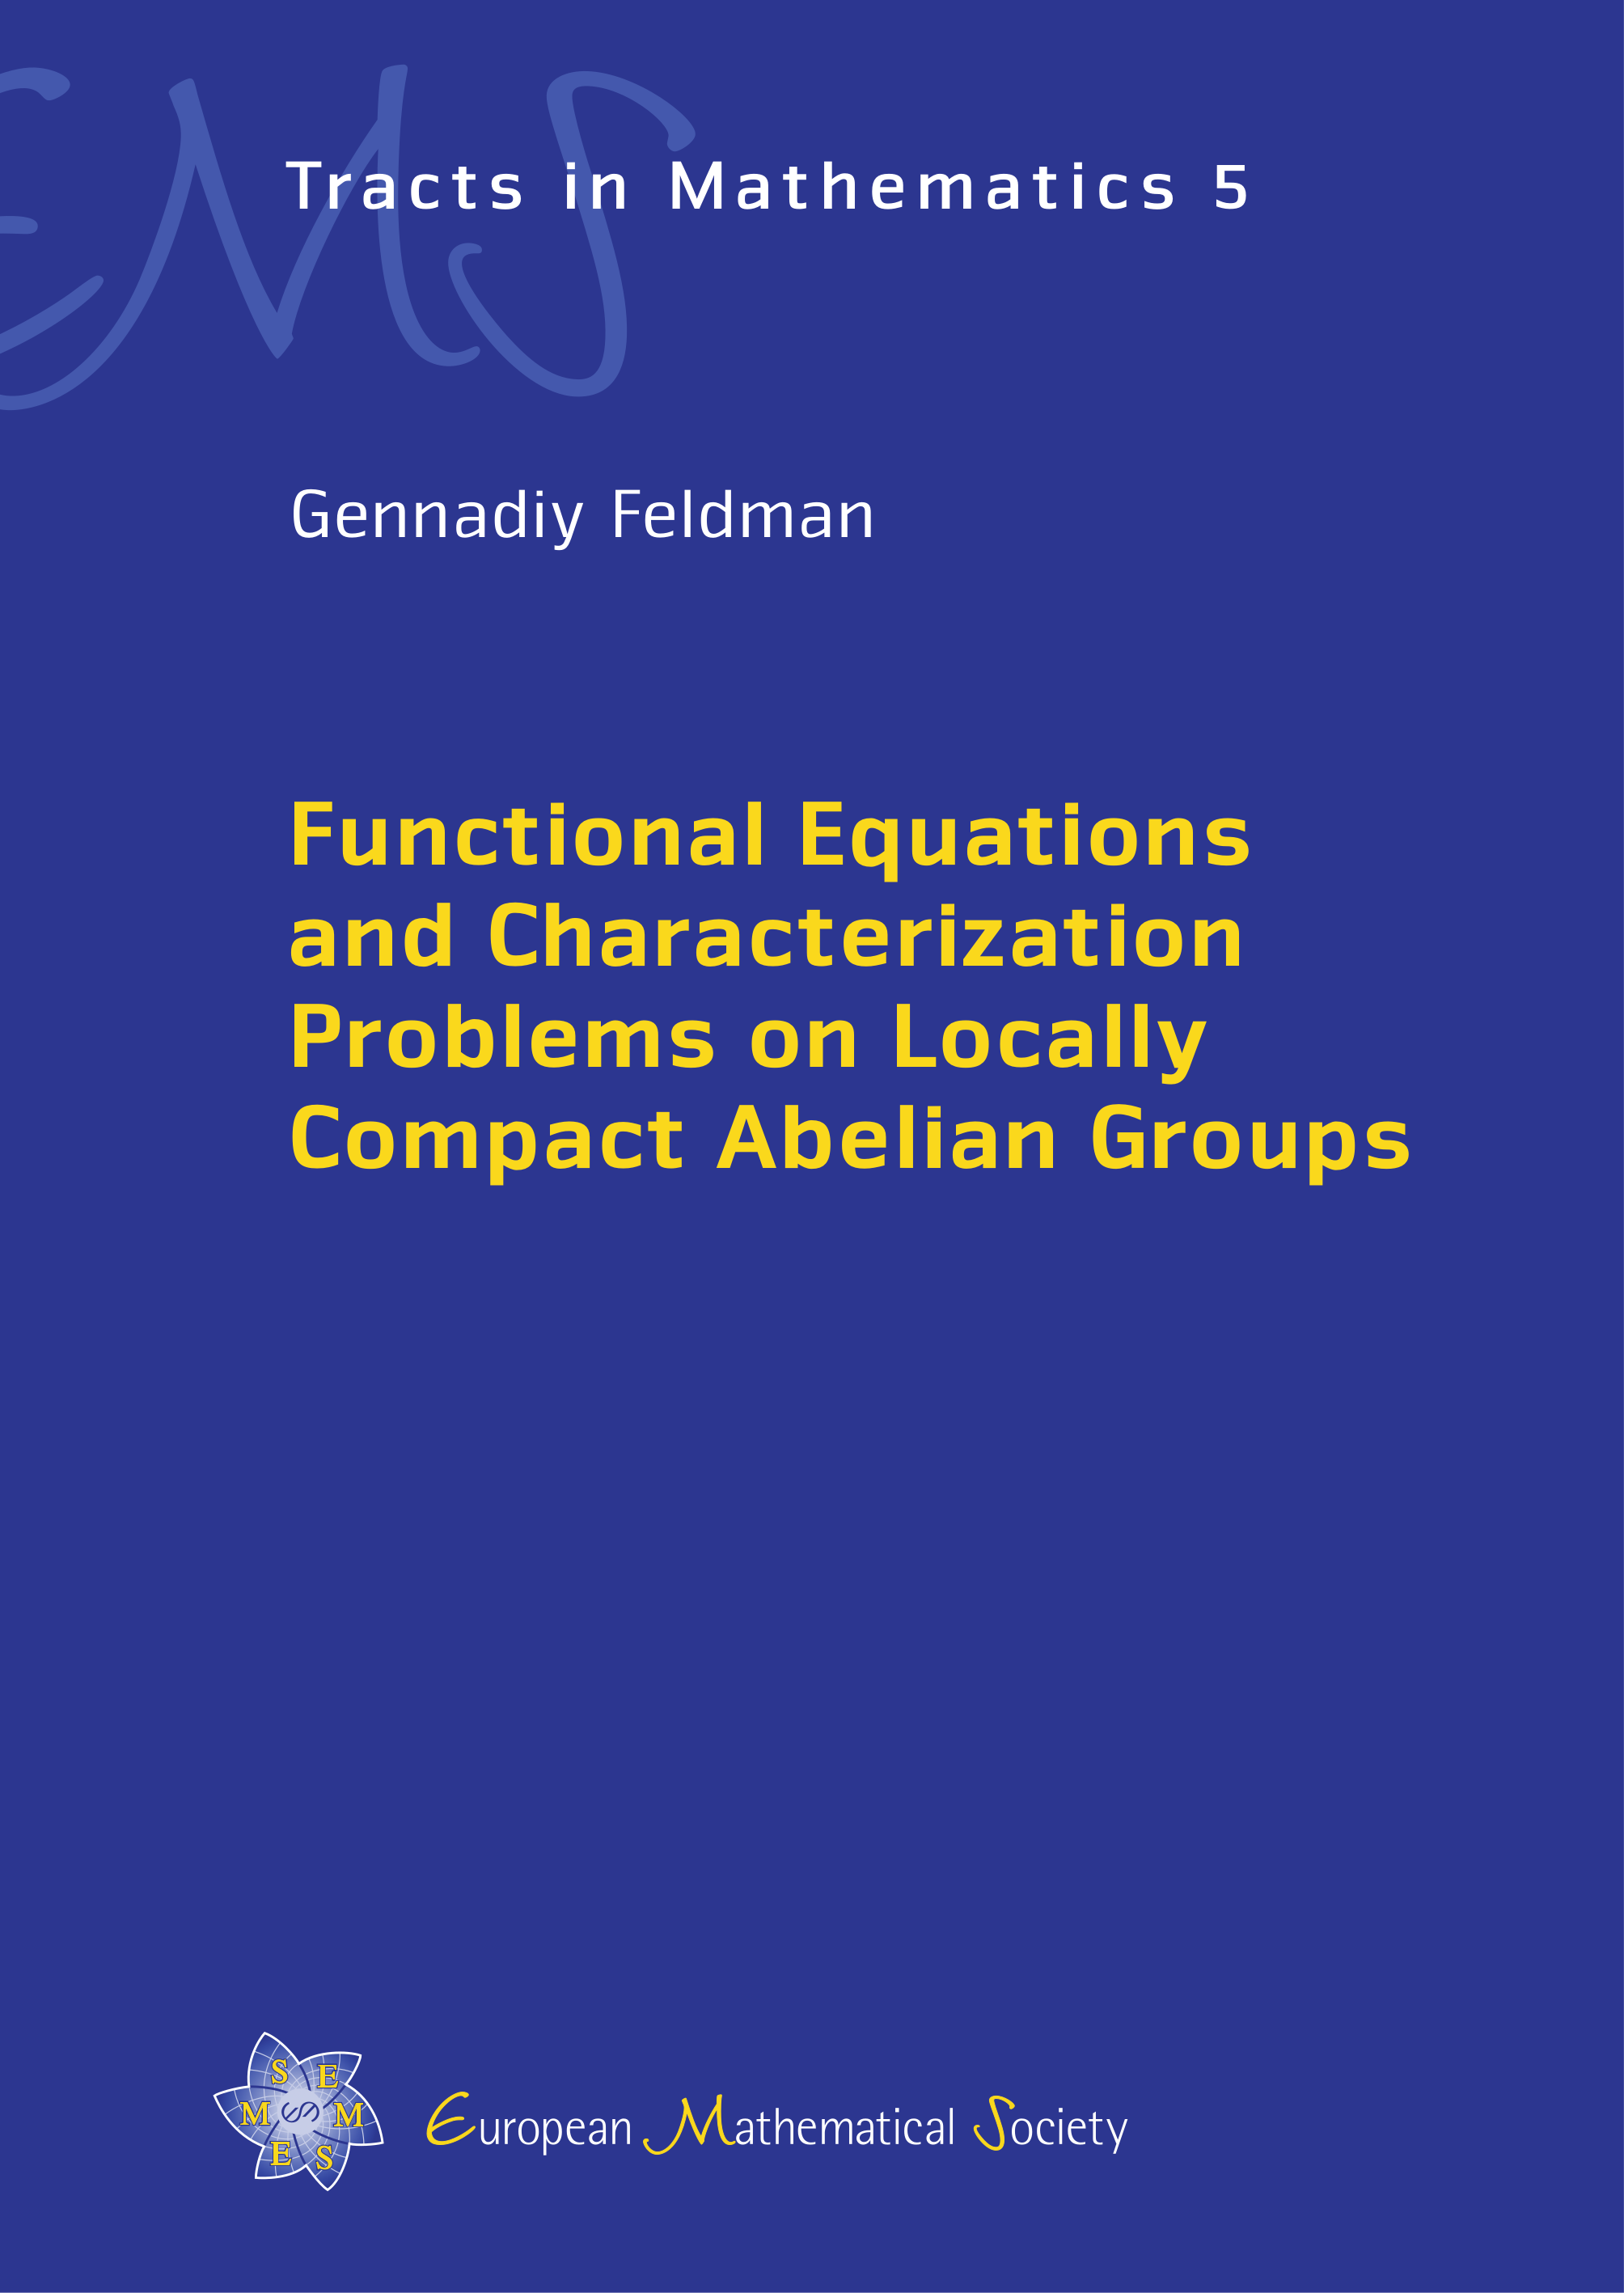 Locally compact Abelian groups cover